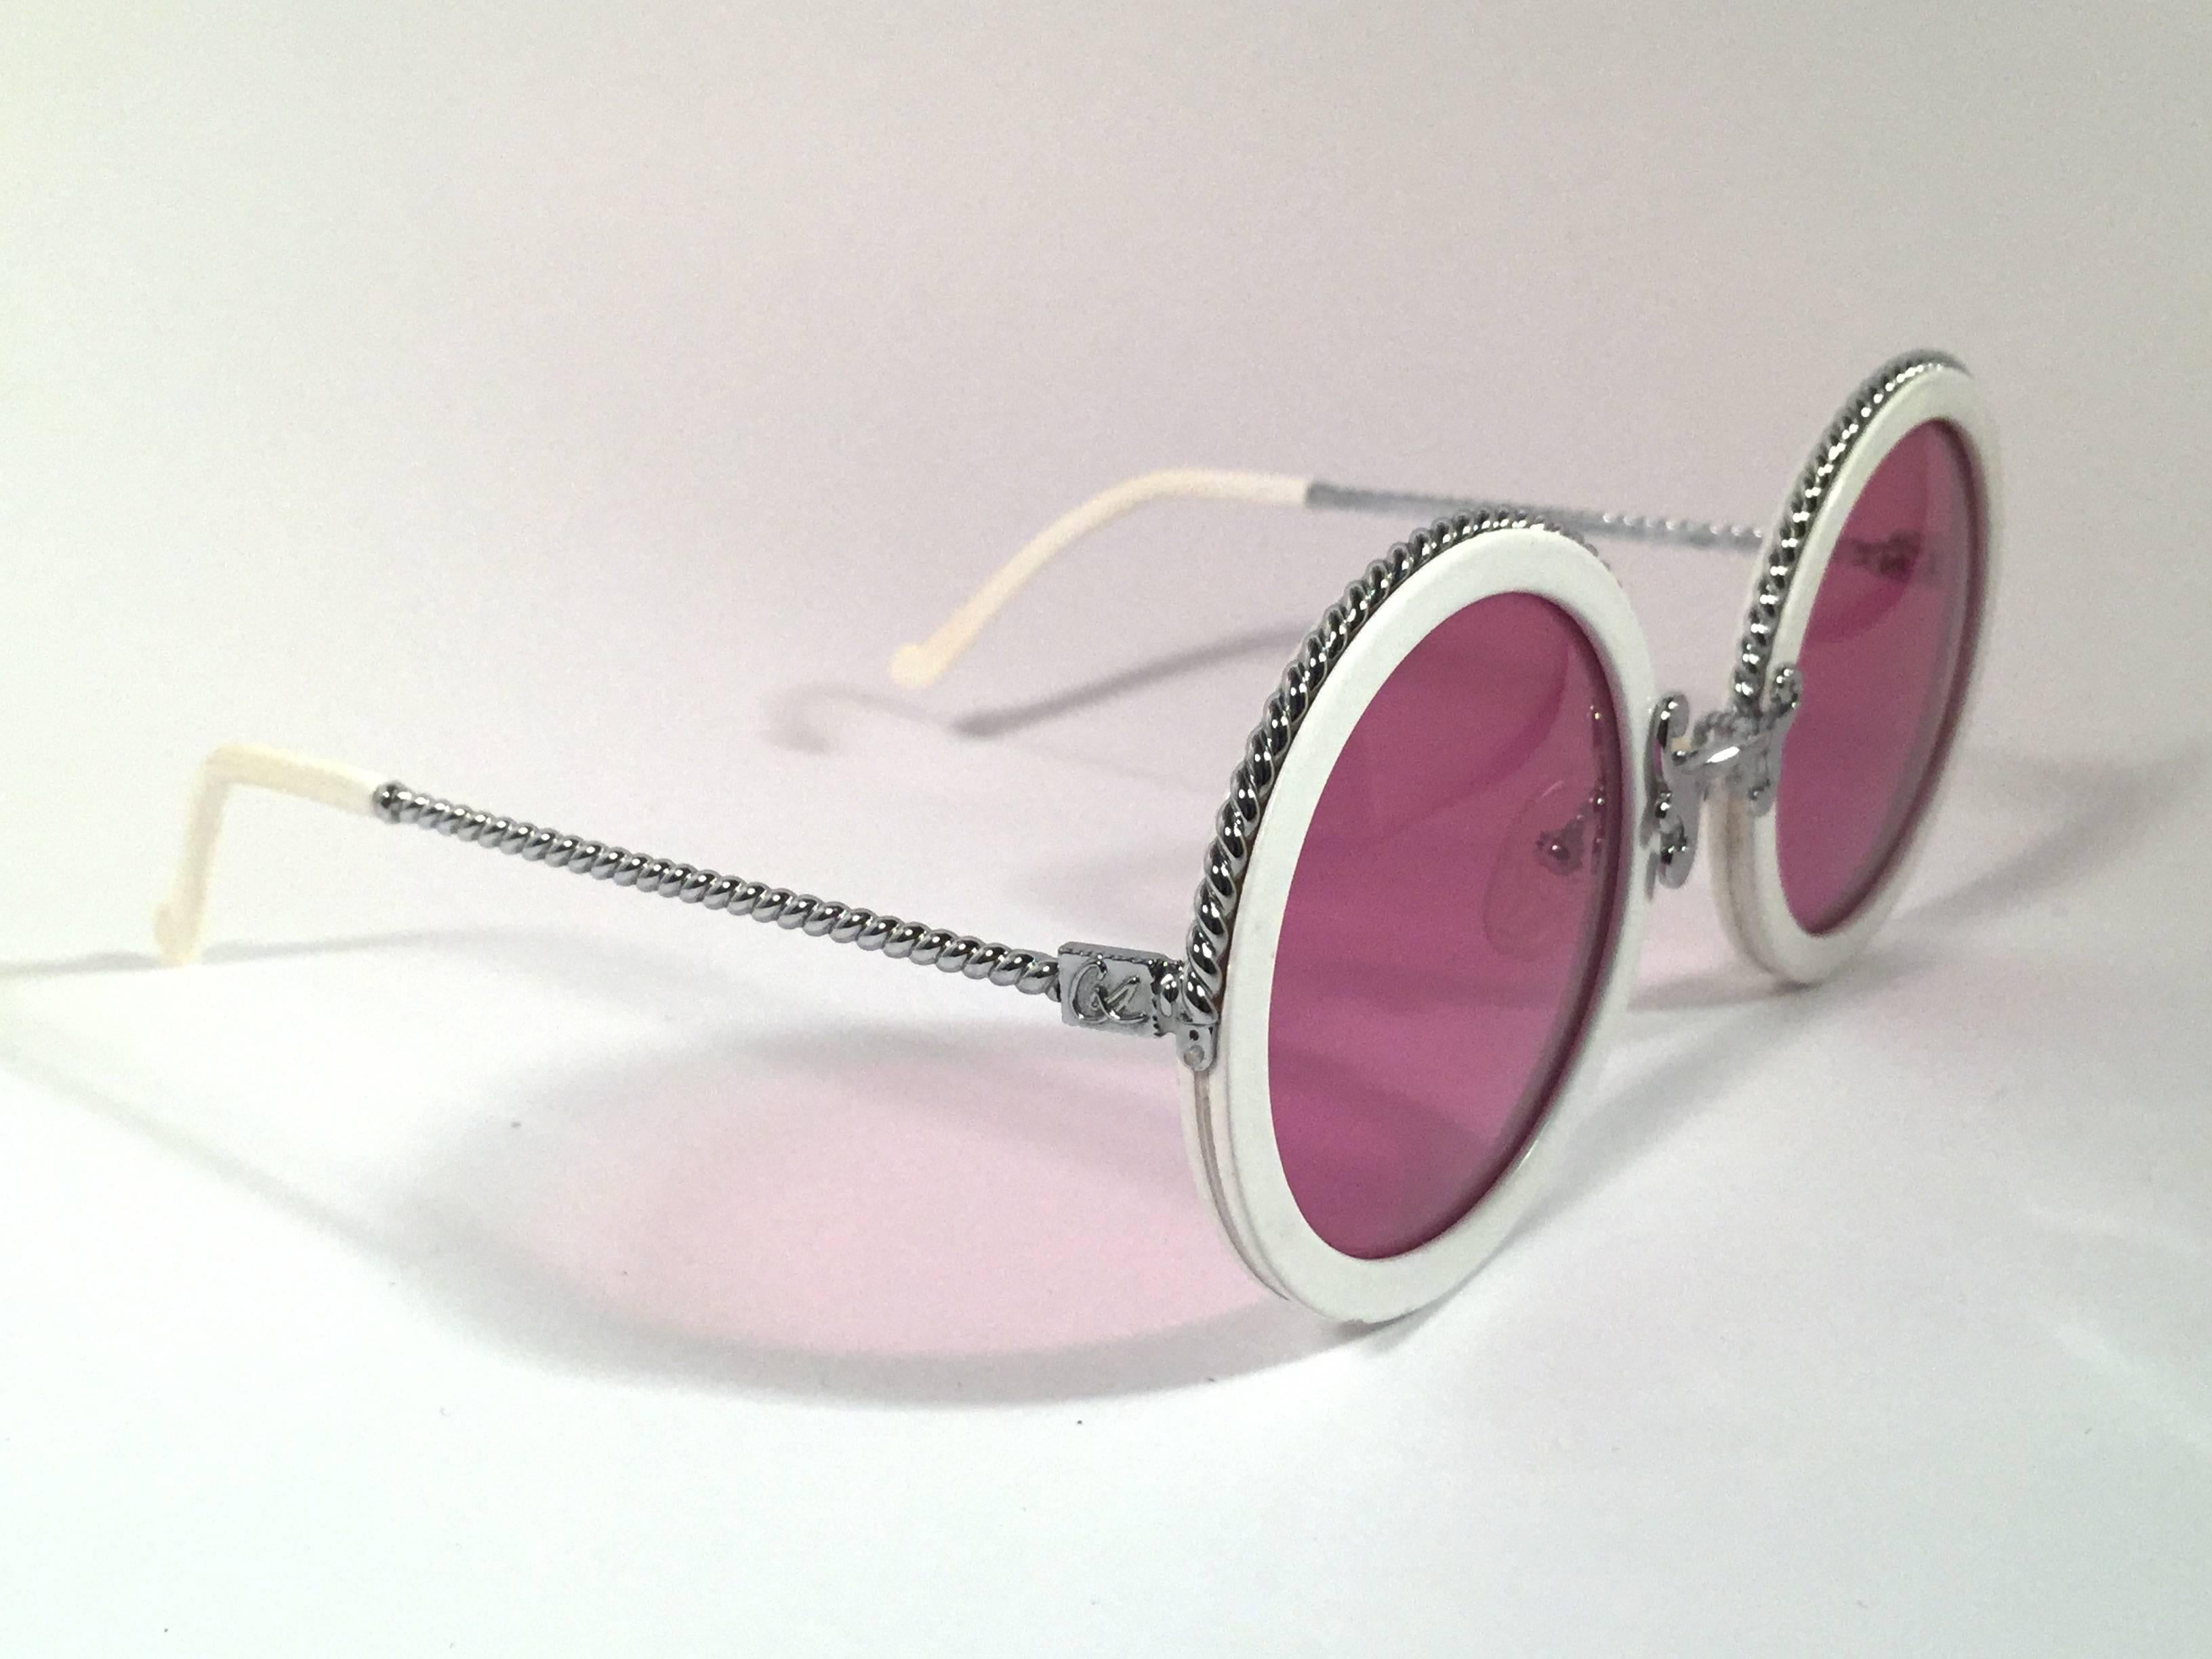 Superb & rare pair of New vintage Christian Lacroix sunglasses. 

White round with delicate silver accents frame holding a pair of spotless candy pink lenses.

New, never worn or displayed. Made in France.
